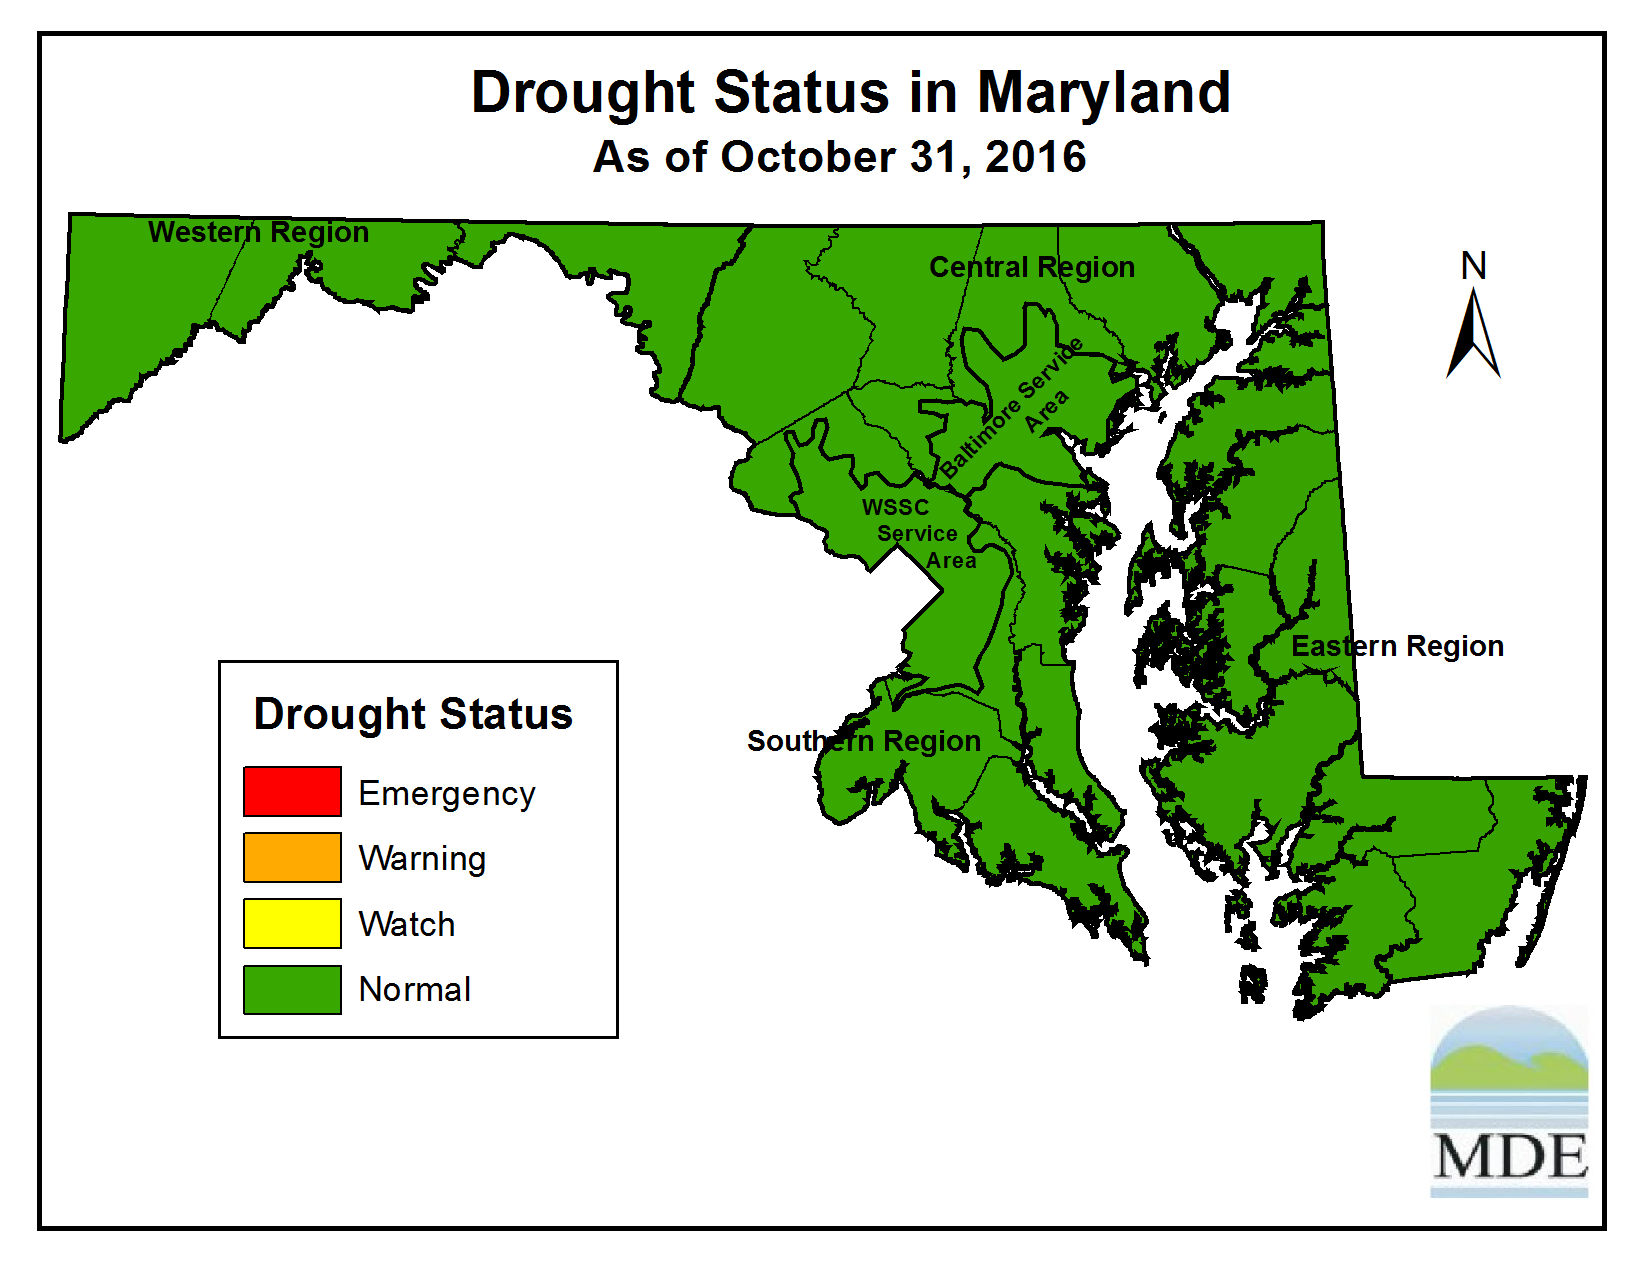 Drought Status as of October 31, 2016